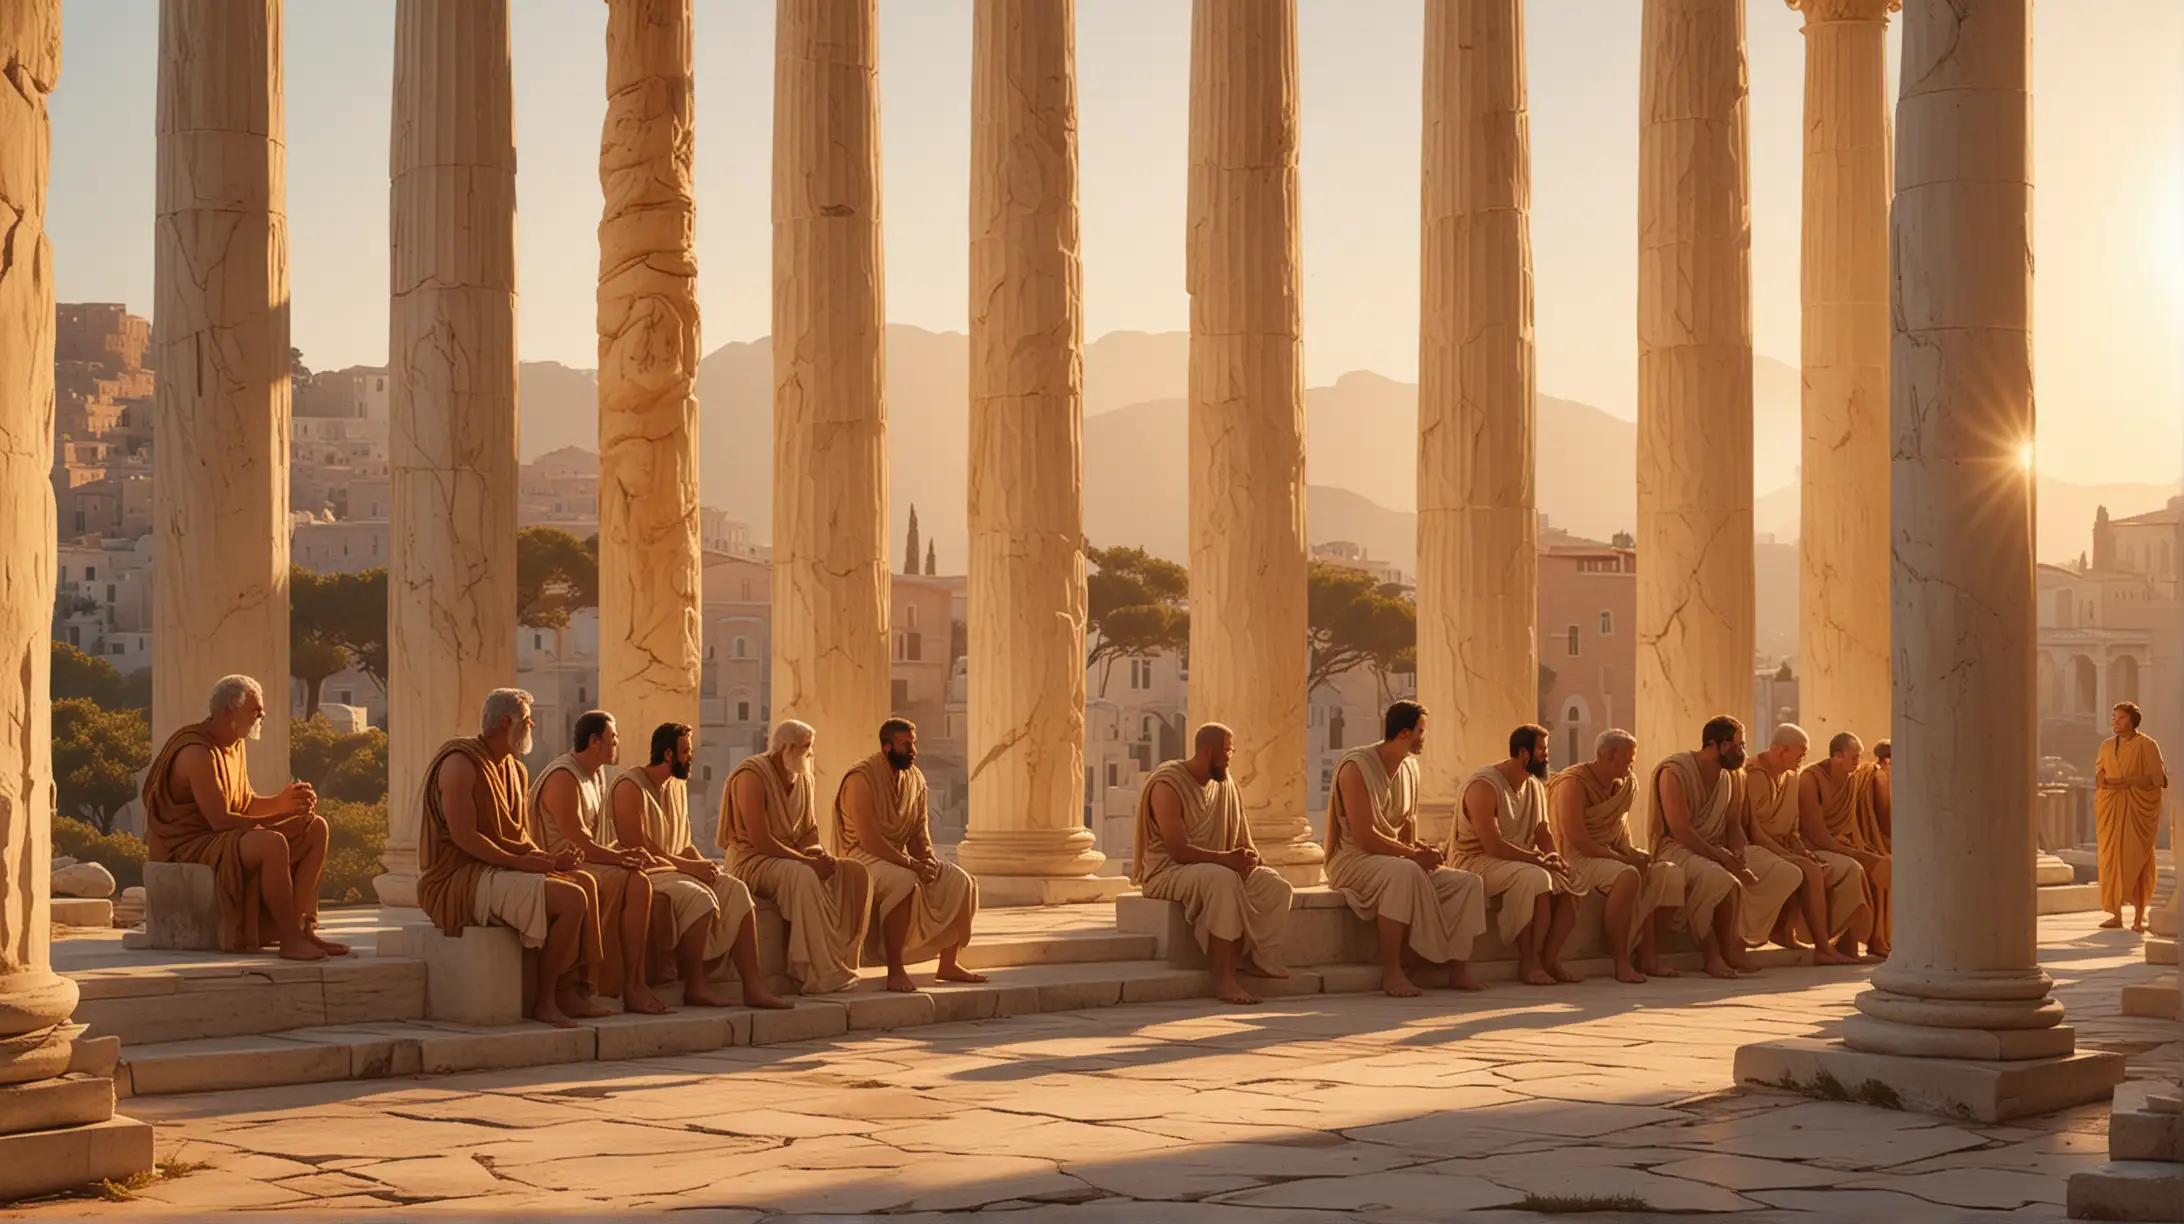 Visualize a serene scene in ancient Greece, where a group of Stoic philosophers engage in deep contemplation under the shade of towering marble columns. The philosophers, with their lean and muscular build, are depicted in animated conversation, gesturing with conviction as they discuss the principles of self-discipline and self-mastery. The warm glow of the setting sun bathes the scene in a golden light, evoking a sense of tranquility and introspection.